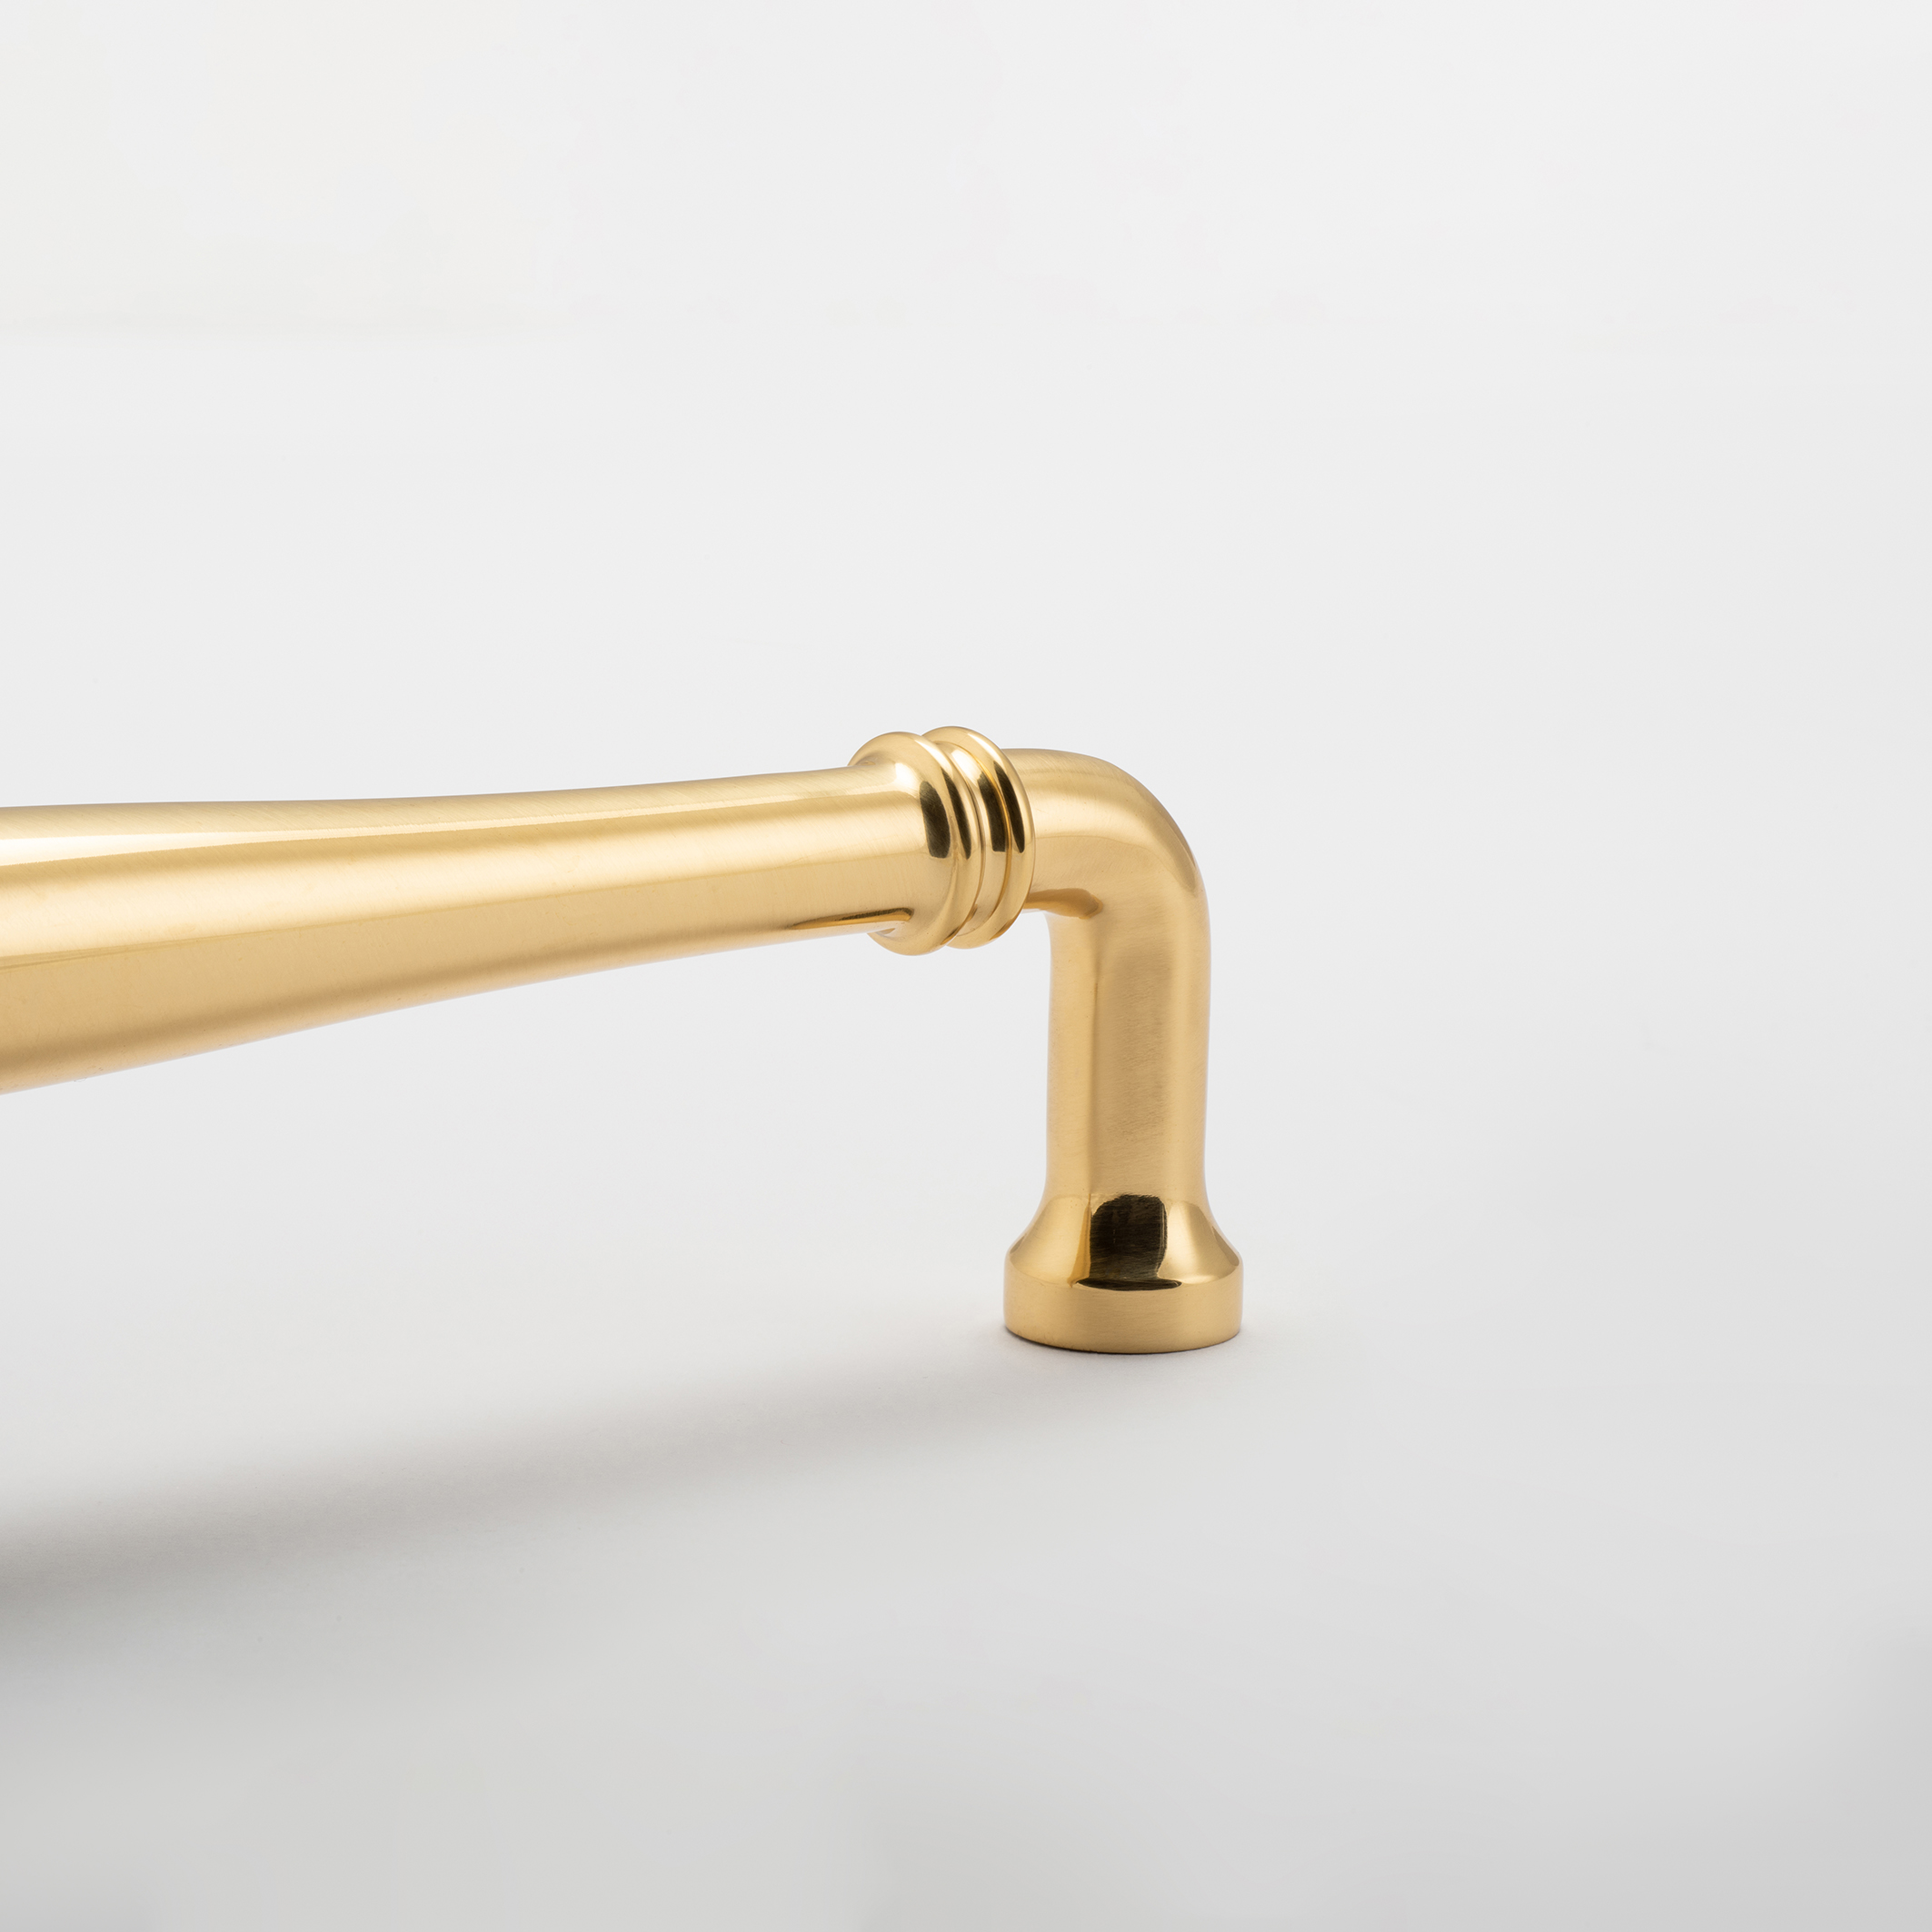 21090B - Sarlat Cabinet Pull with Backplate - CTC320mm - Polished Brass